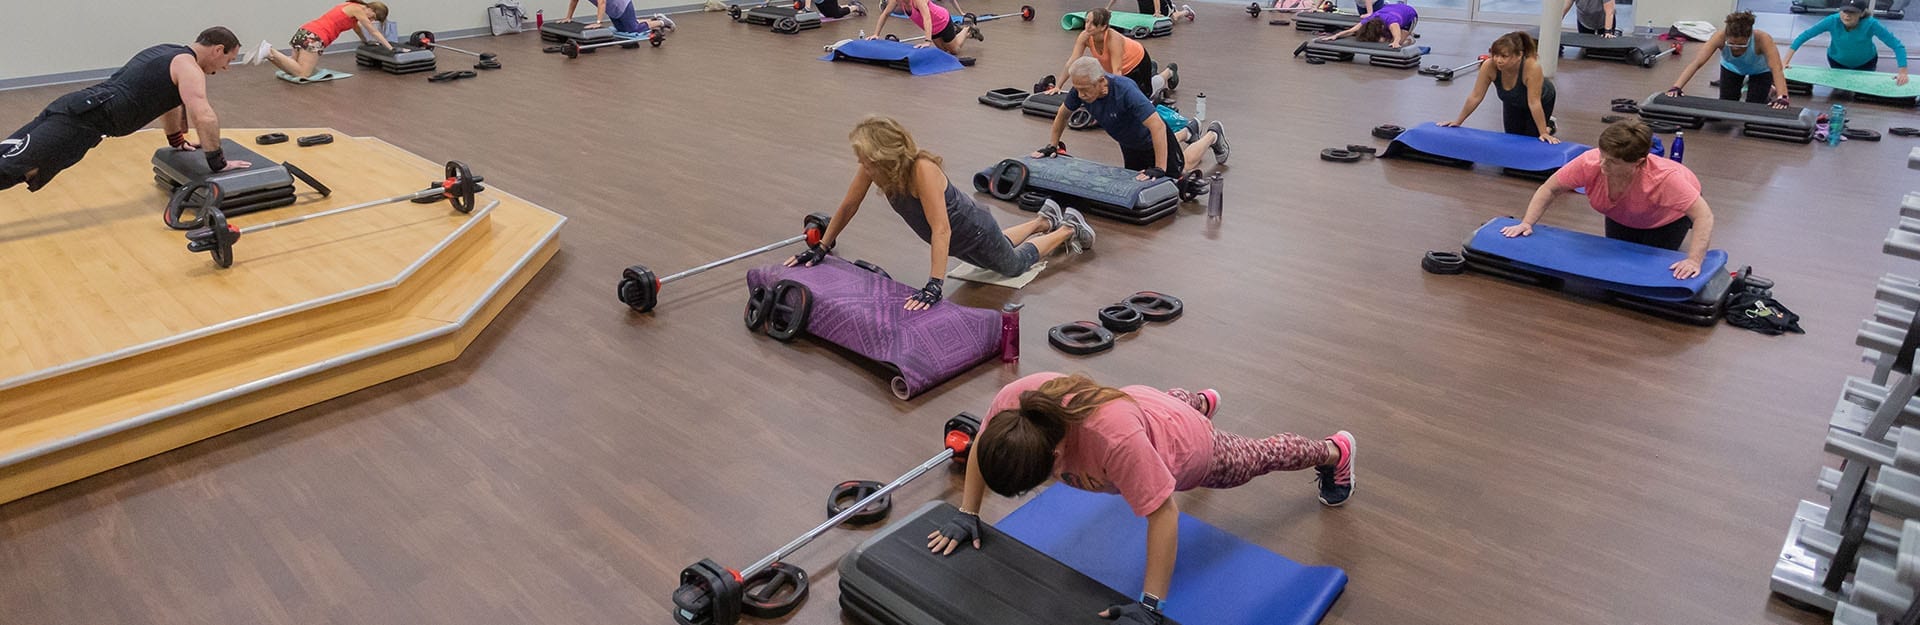 large exercise class in spacious modern gym doing pushups